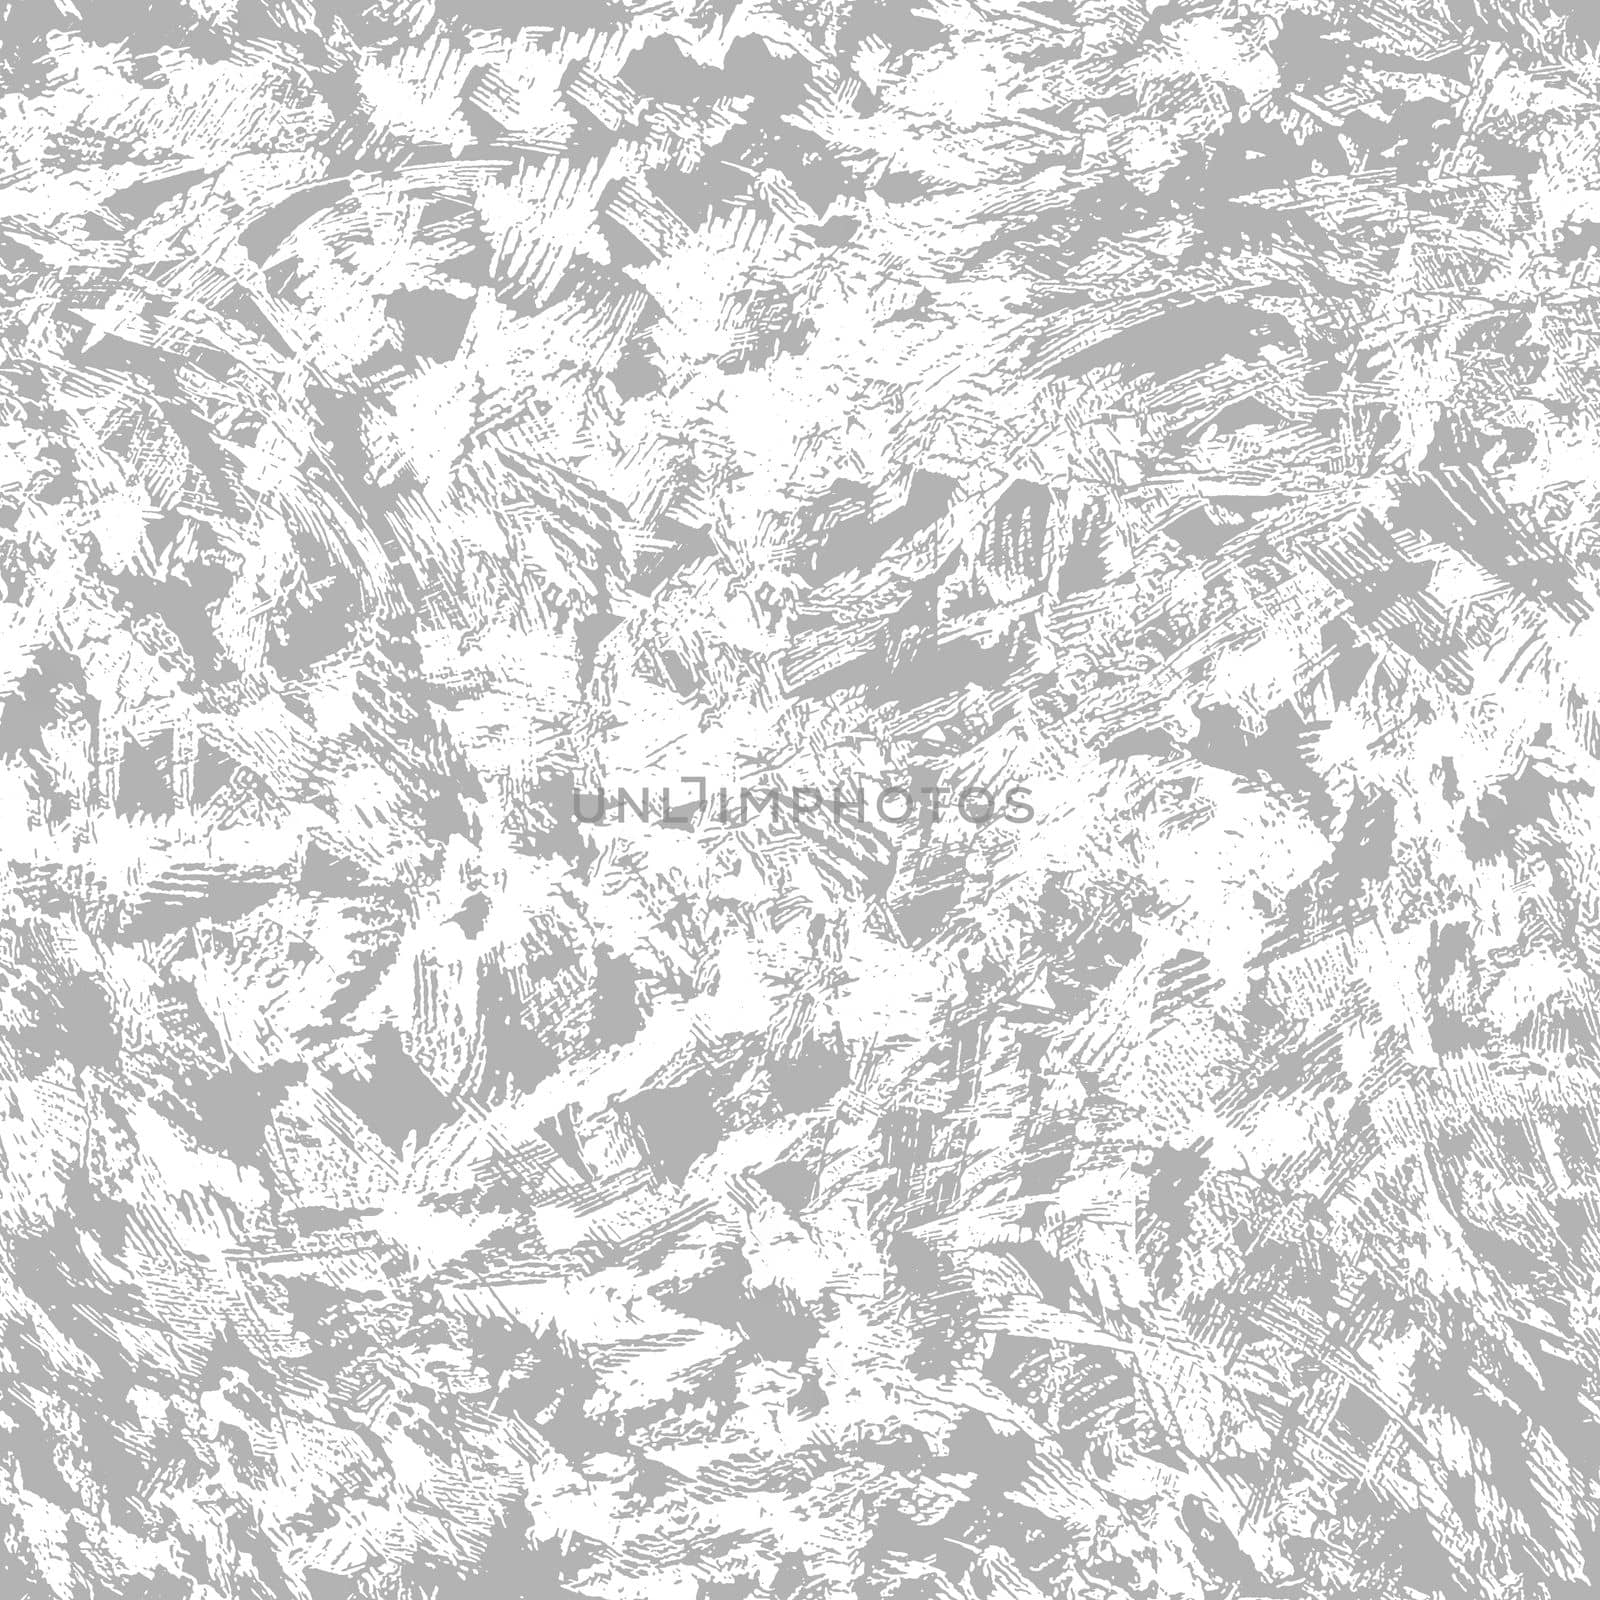 Distressed Crosshatch Pattern, Seamless pattern Grey And White grunge hand drawing texture